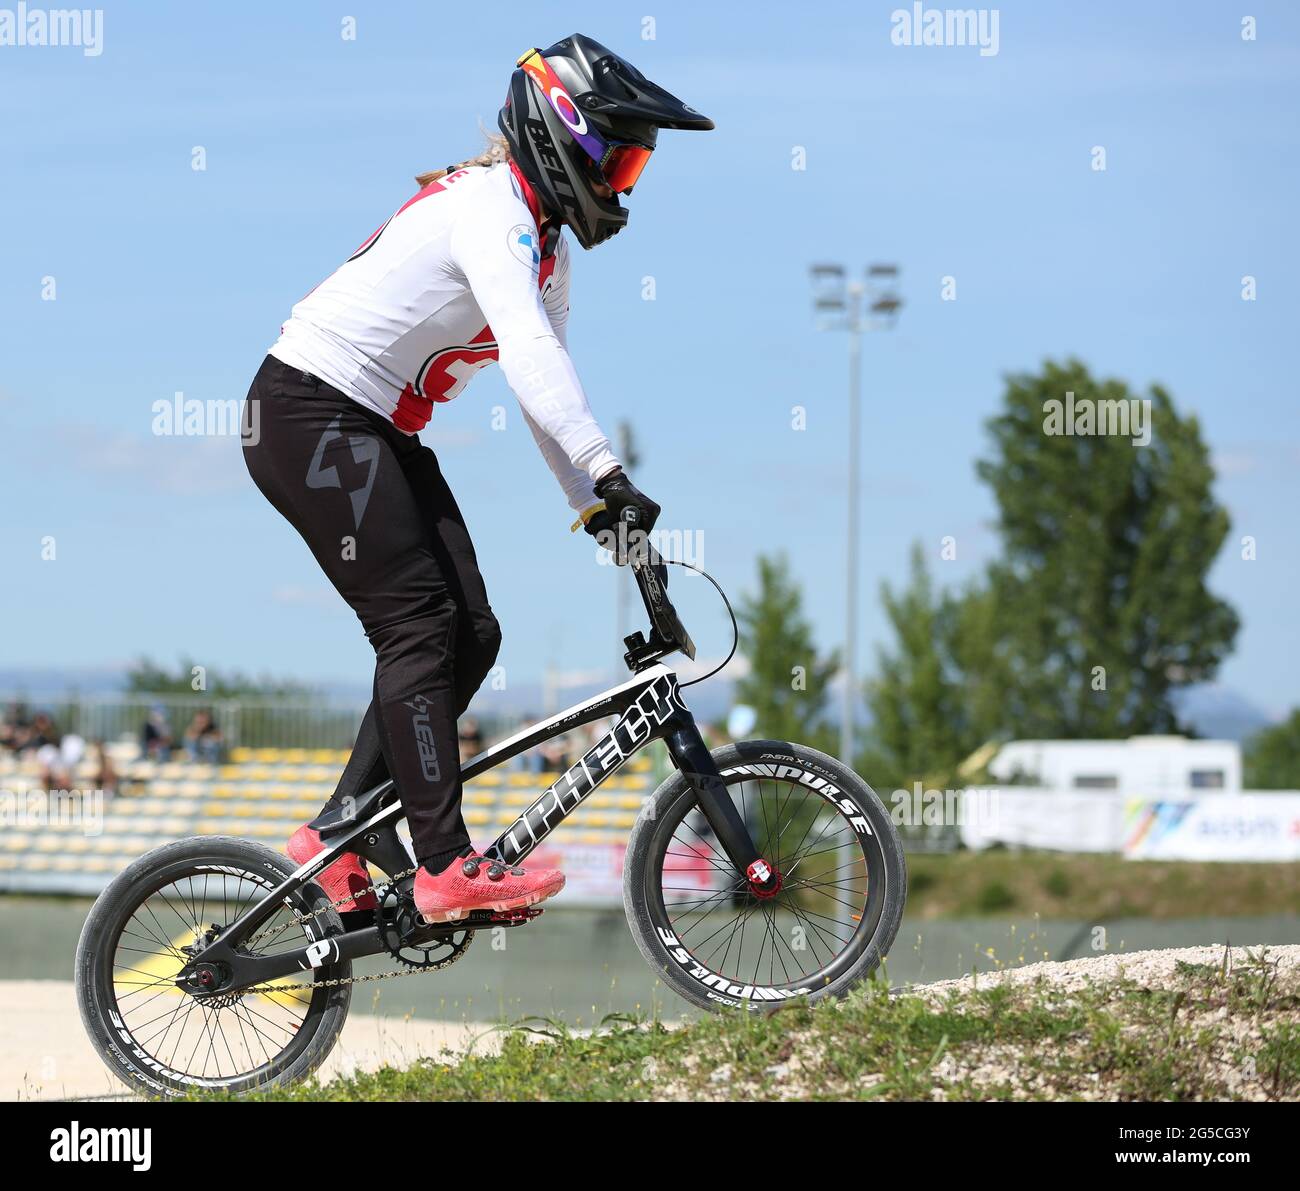 Nadine AEBERHARD of Switzerland competes in the UCI BMX Supercross World  Cup Round 1 at the BMX Olympic Arena on May 8th 2021 in Verona, Italy Stock  Photo - Alamy